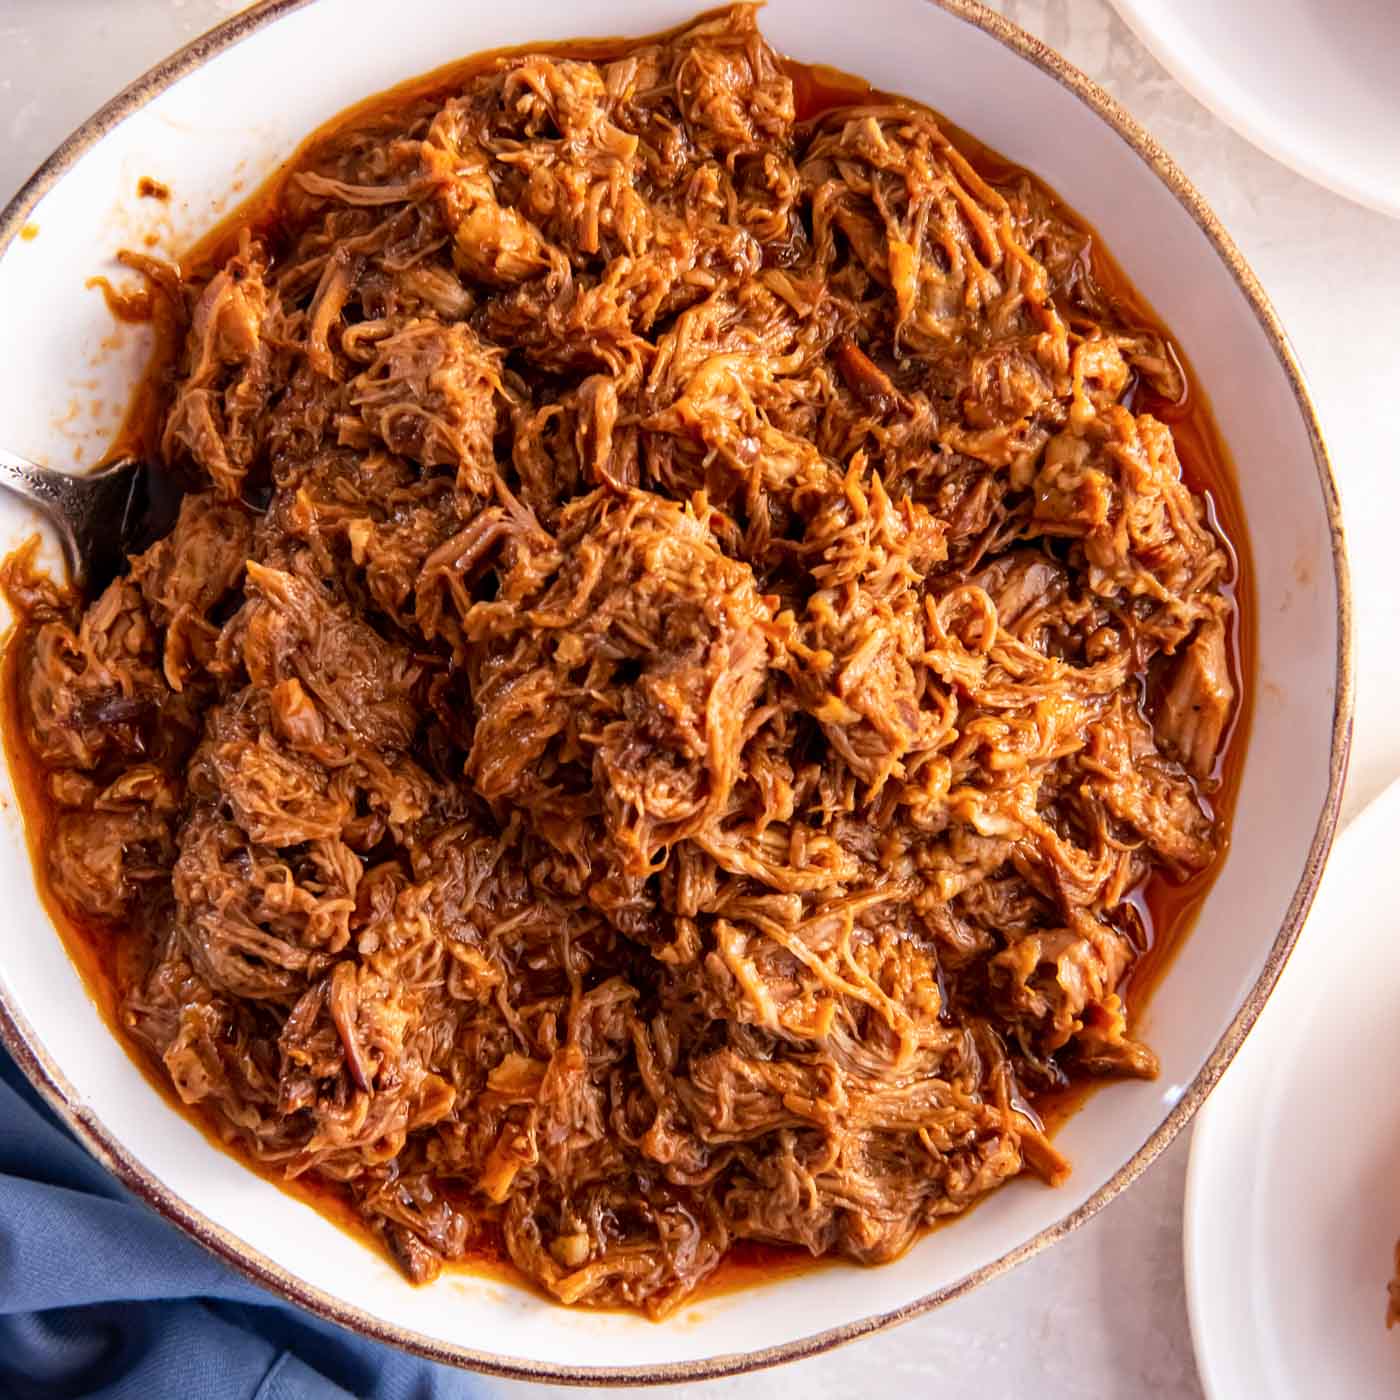 How to Make Pulled Pork in a Crock Pot